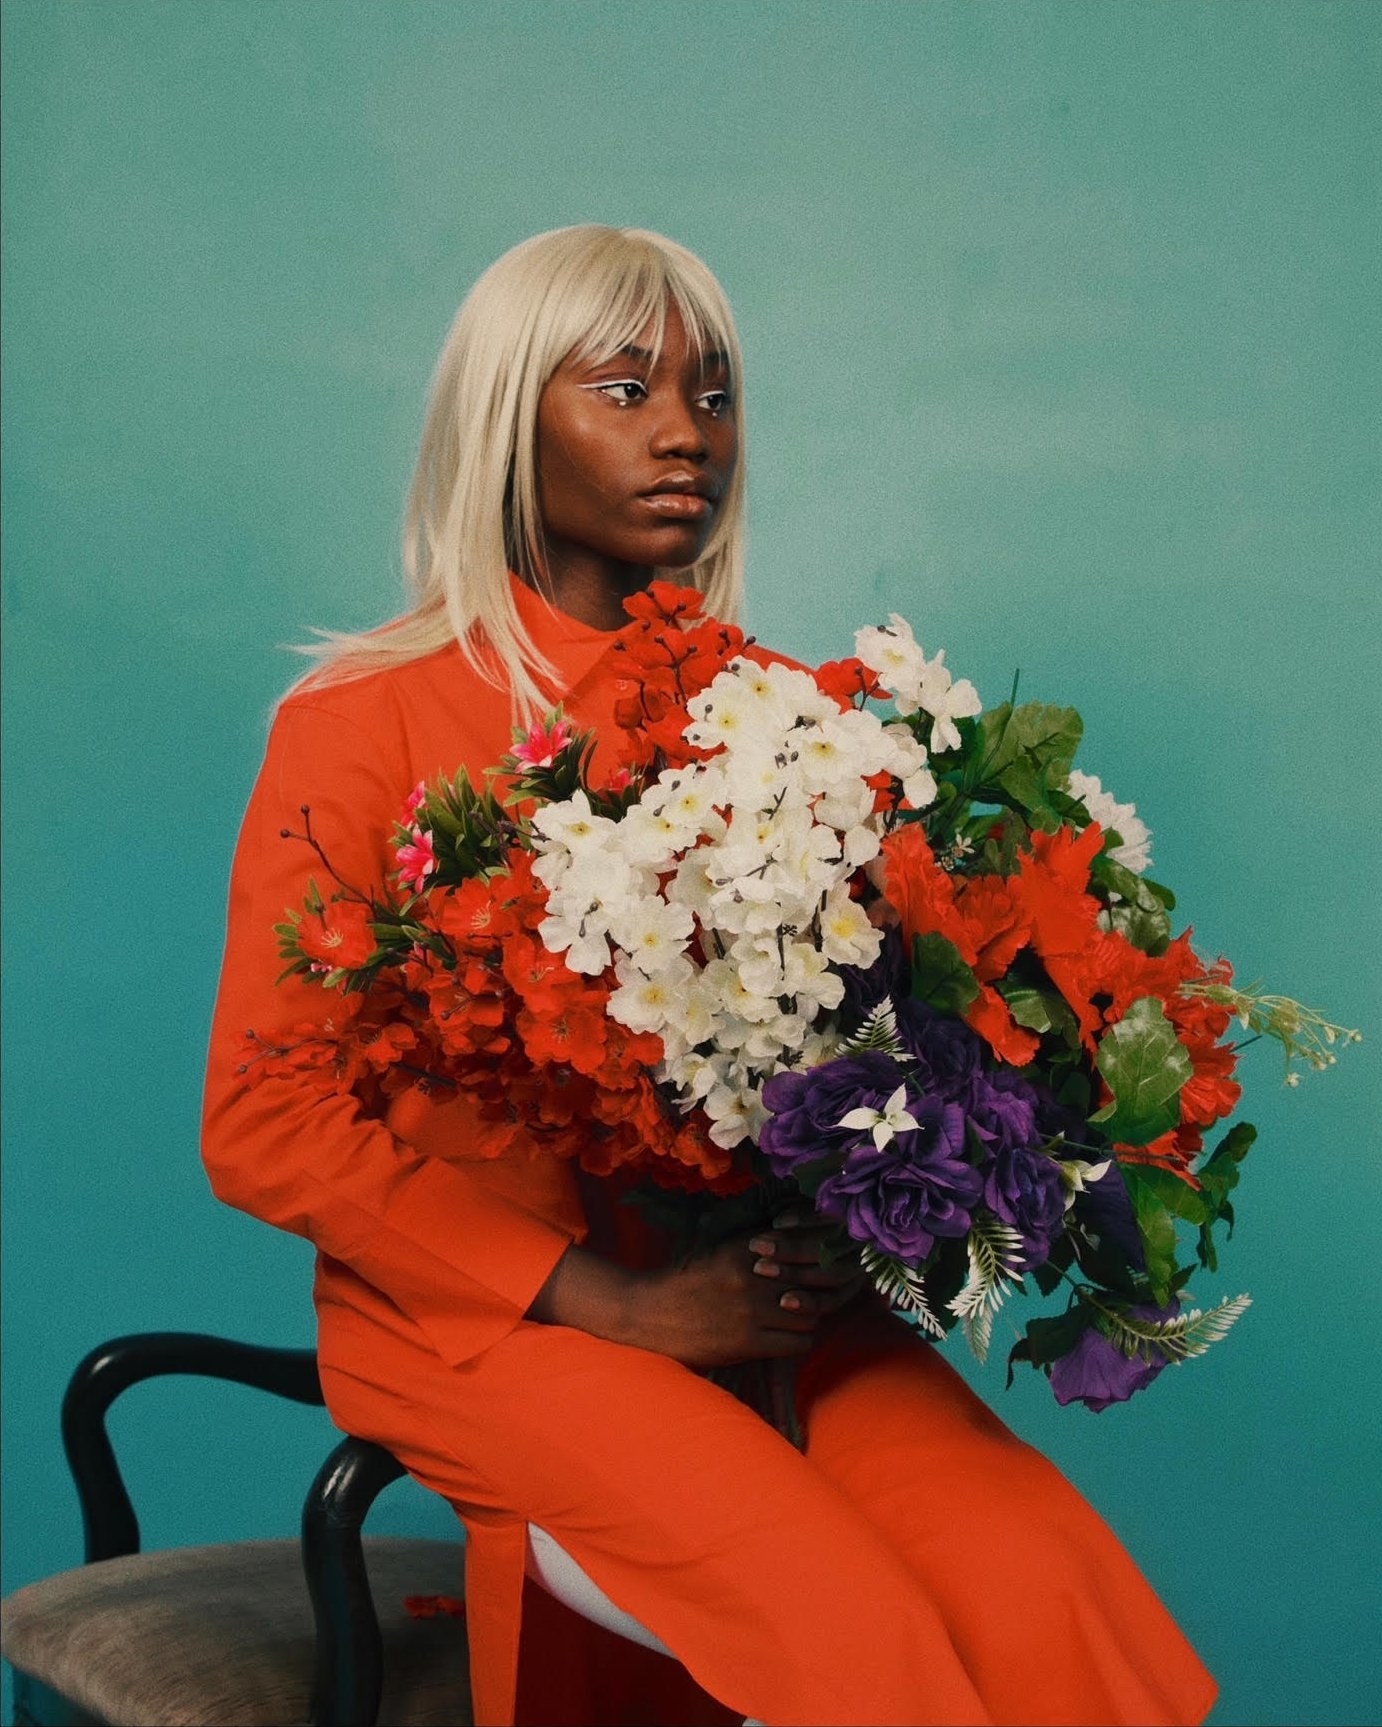 A person with blonde hair and vibrant eye makeup sitting on the arm of a chair and holding a large bouquet of flowers